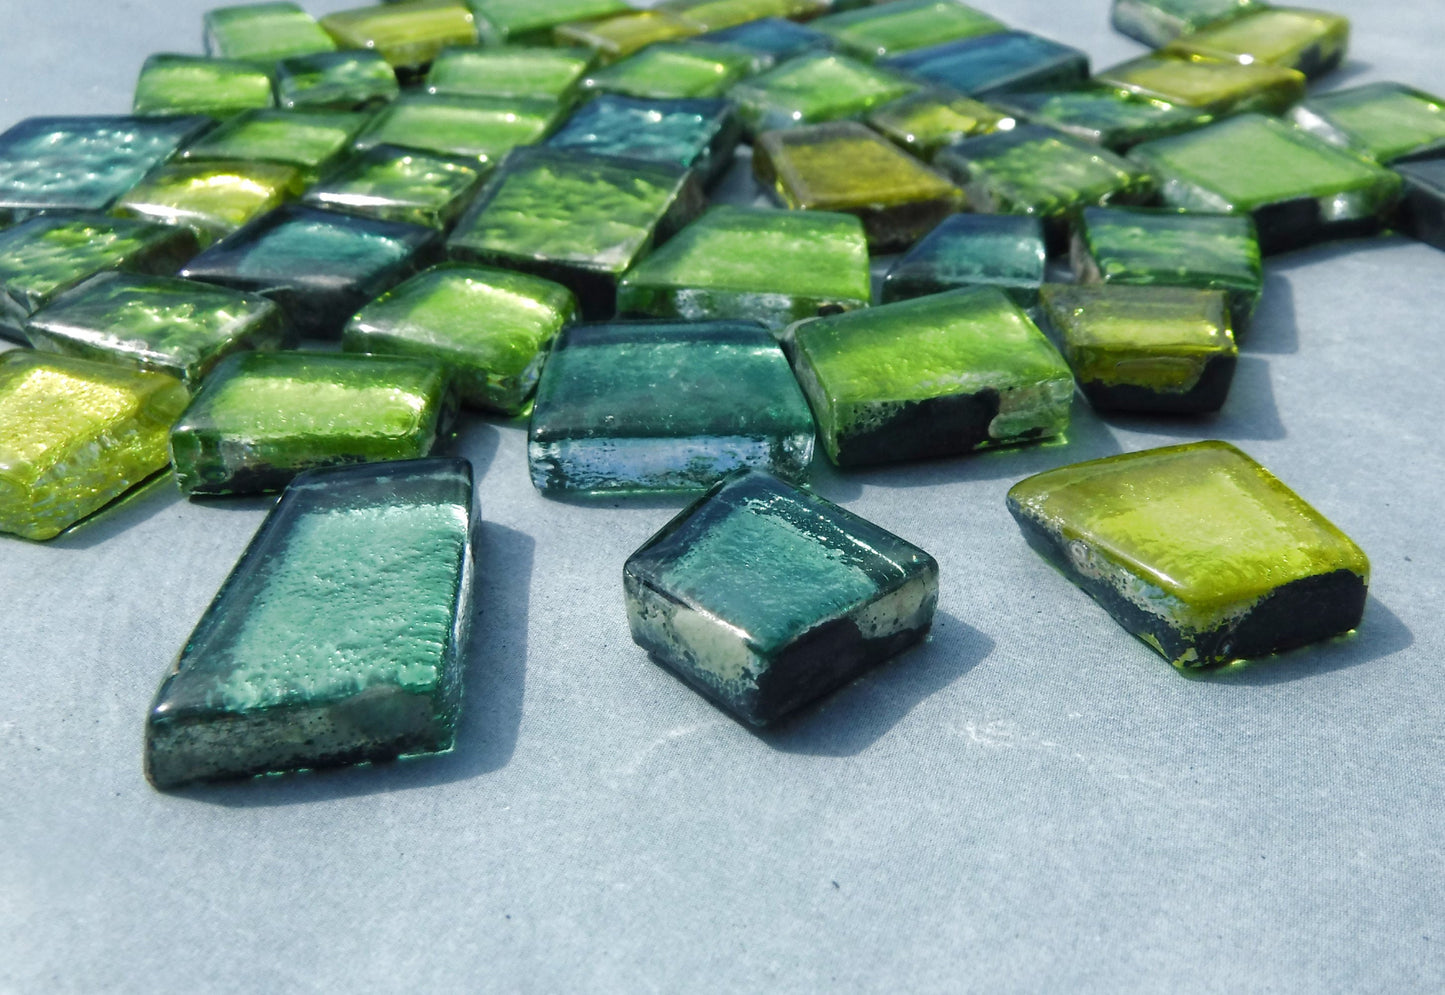 Green and Yellow Metallic Foil Glass Tiles - Assorted Shapes - 50 grams in Pandora Green